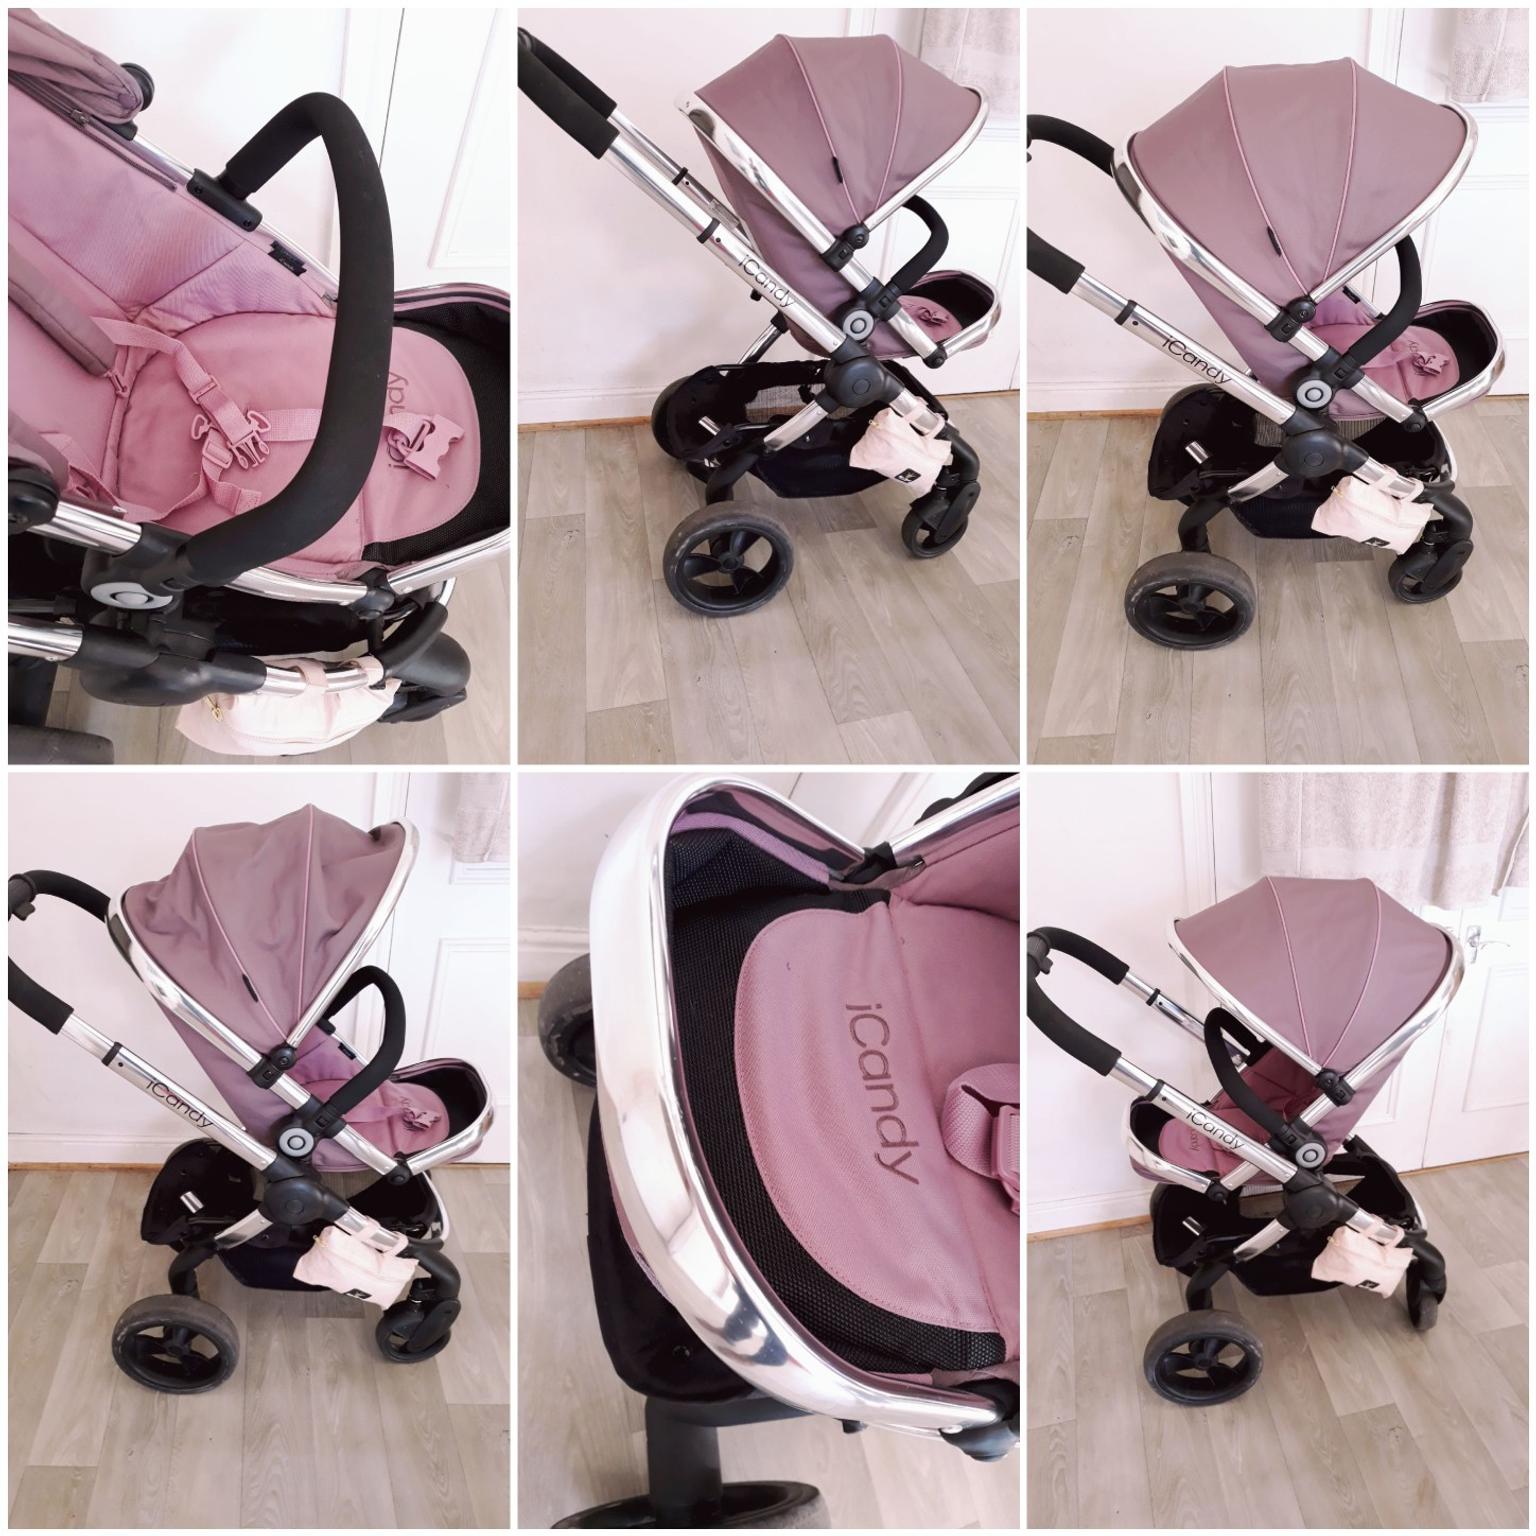 icandy peach 3 travel system